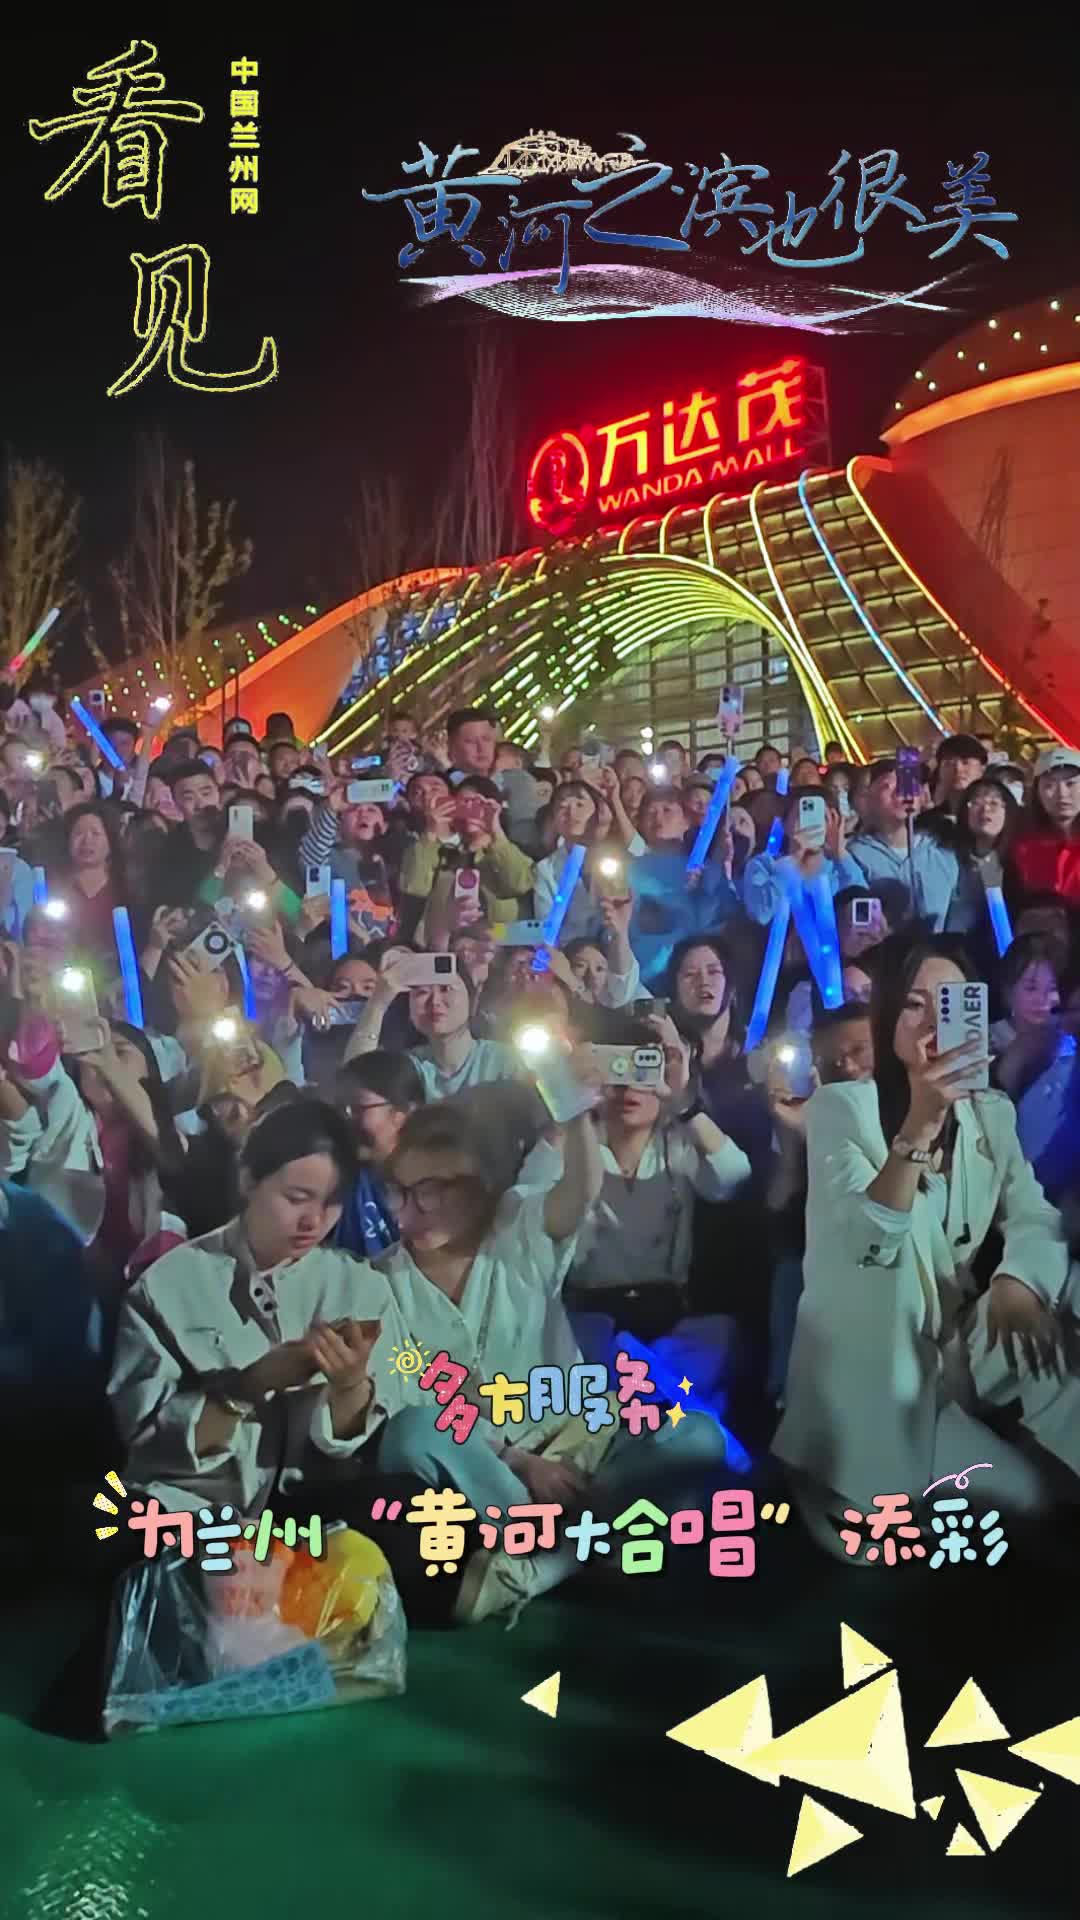  The bank of the Yellow River is also beautiful | Multi service adds color to Lanzhou's "Yellow River Cantata"